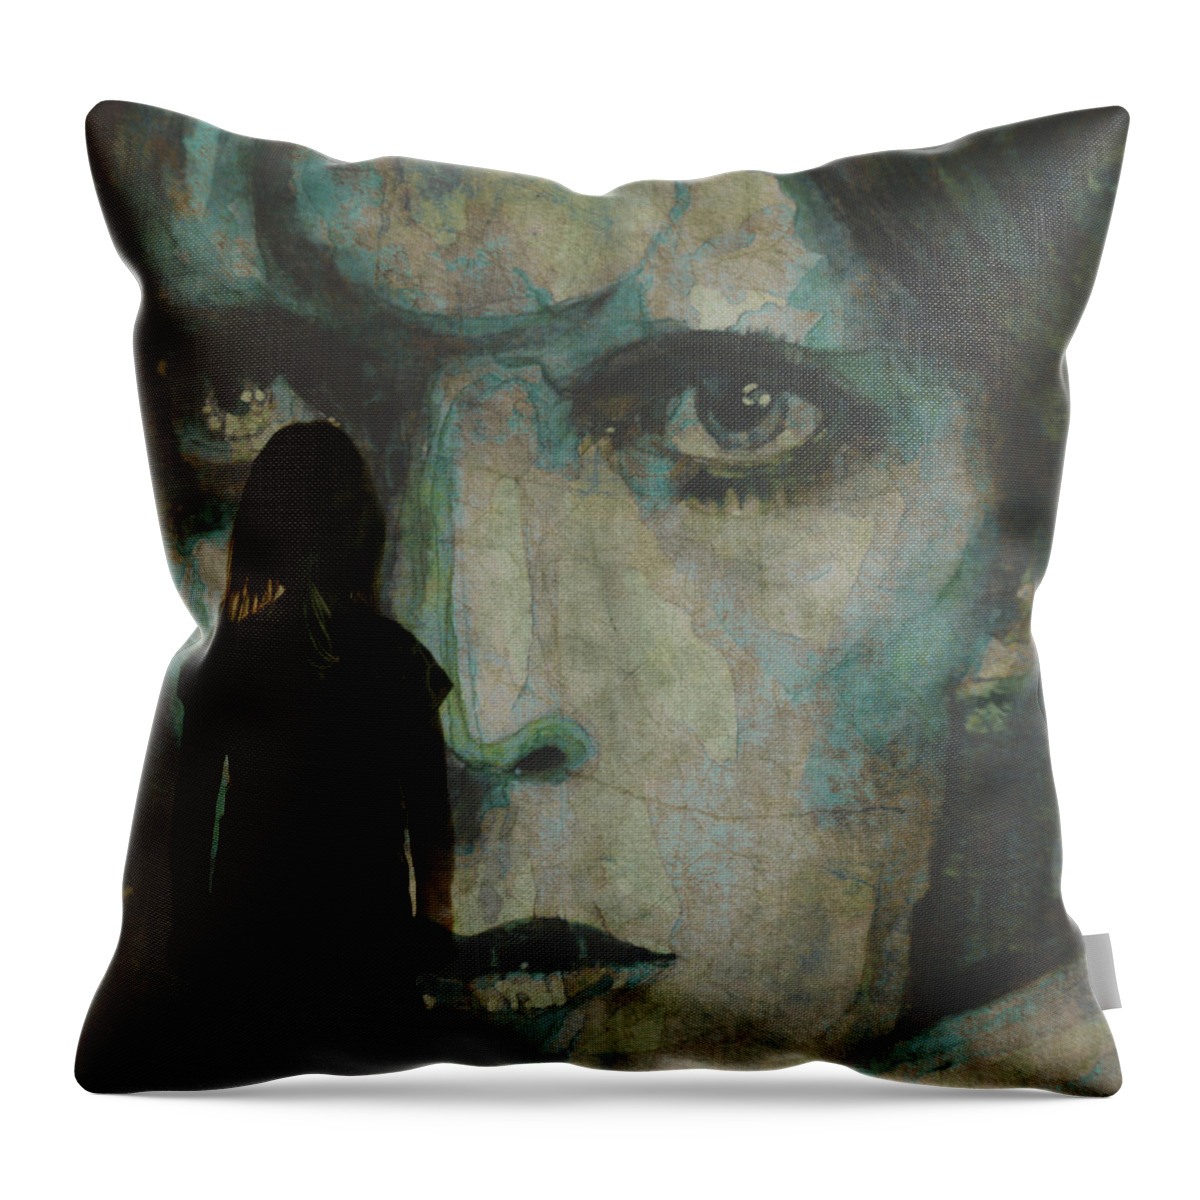 David Bowie Throw Pillow featuring the painting Let The Children Lose It Let The Children Use It Let All The Children Boogie by Paul Lovering